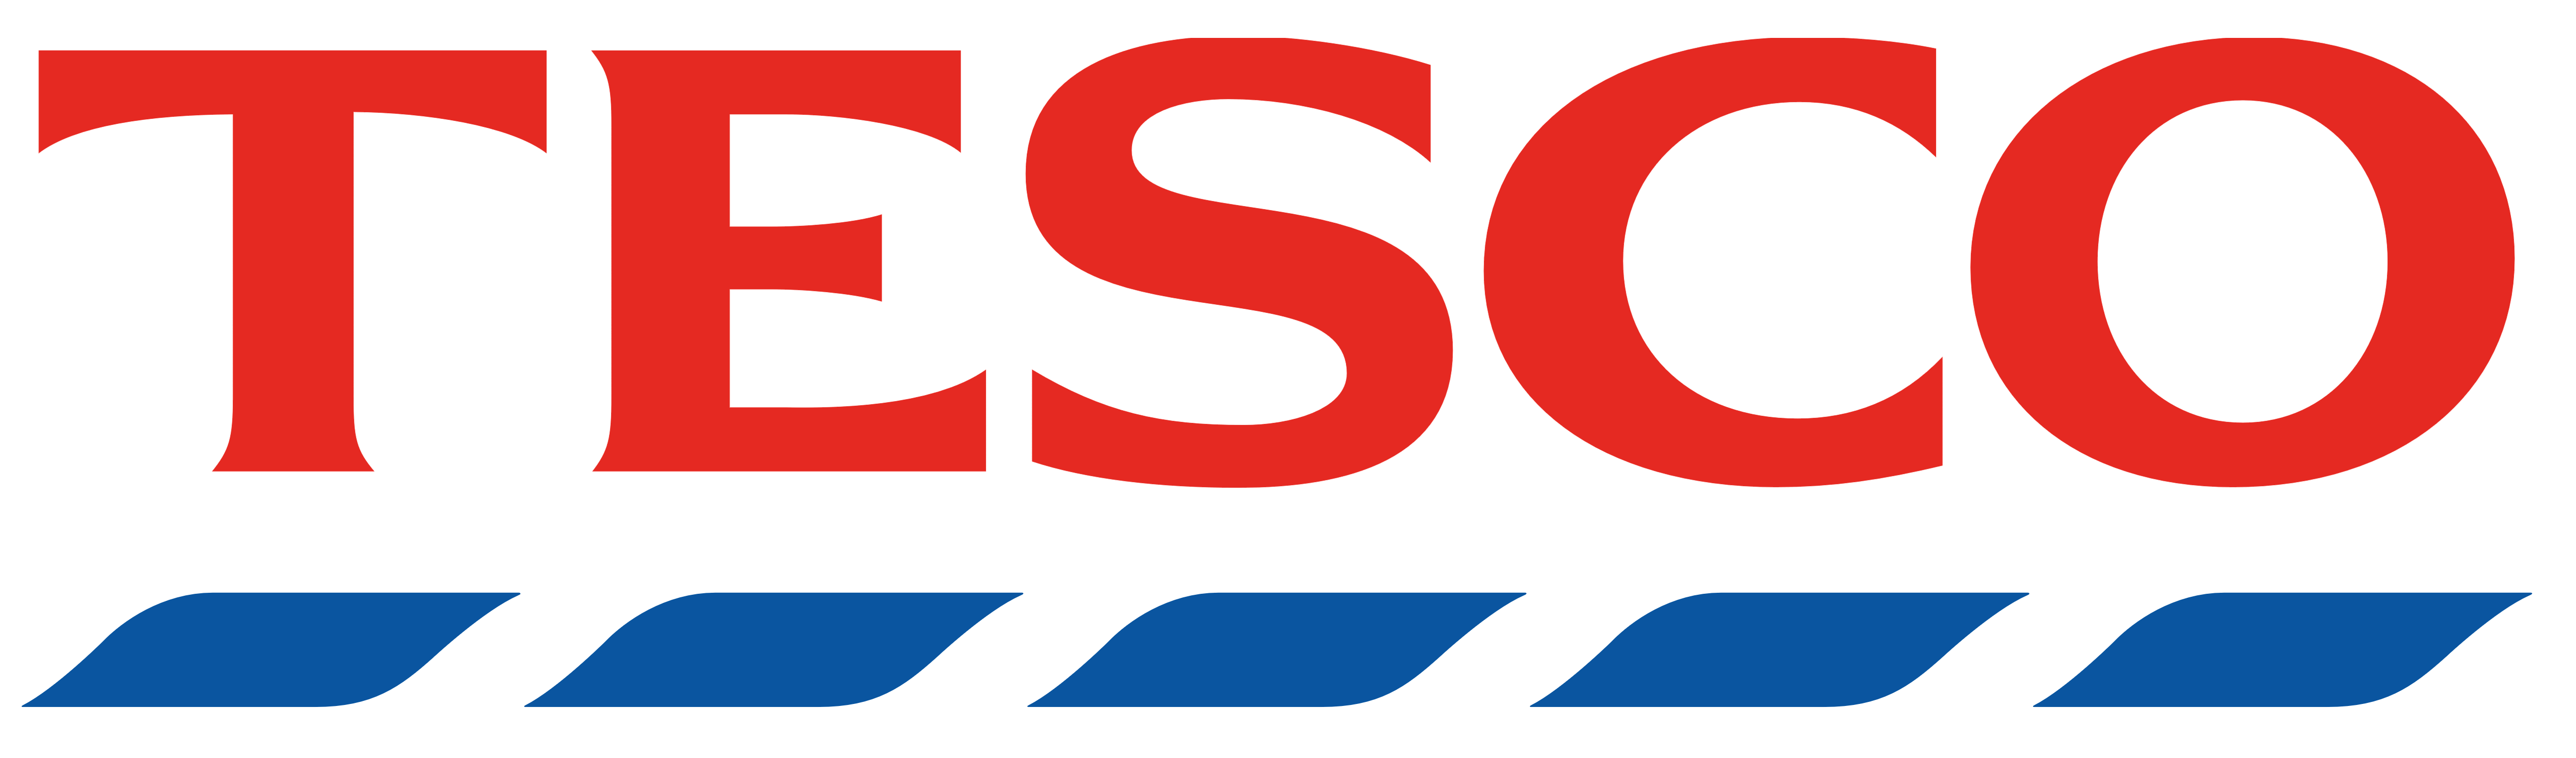 Logo Text Tesco Area Extra Free Photo PNG PNG Image